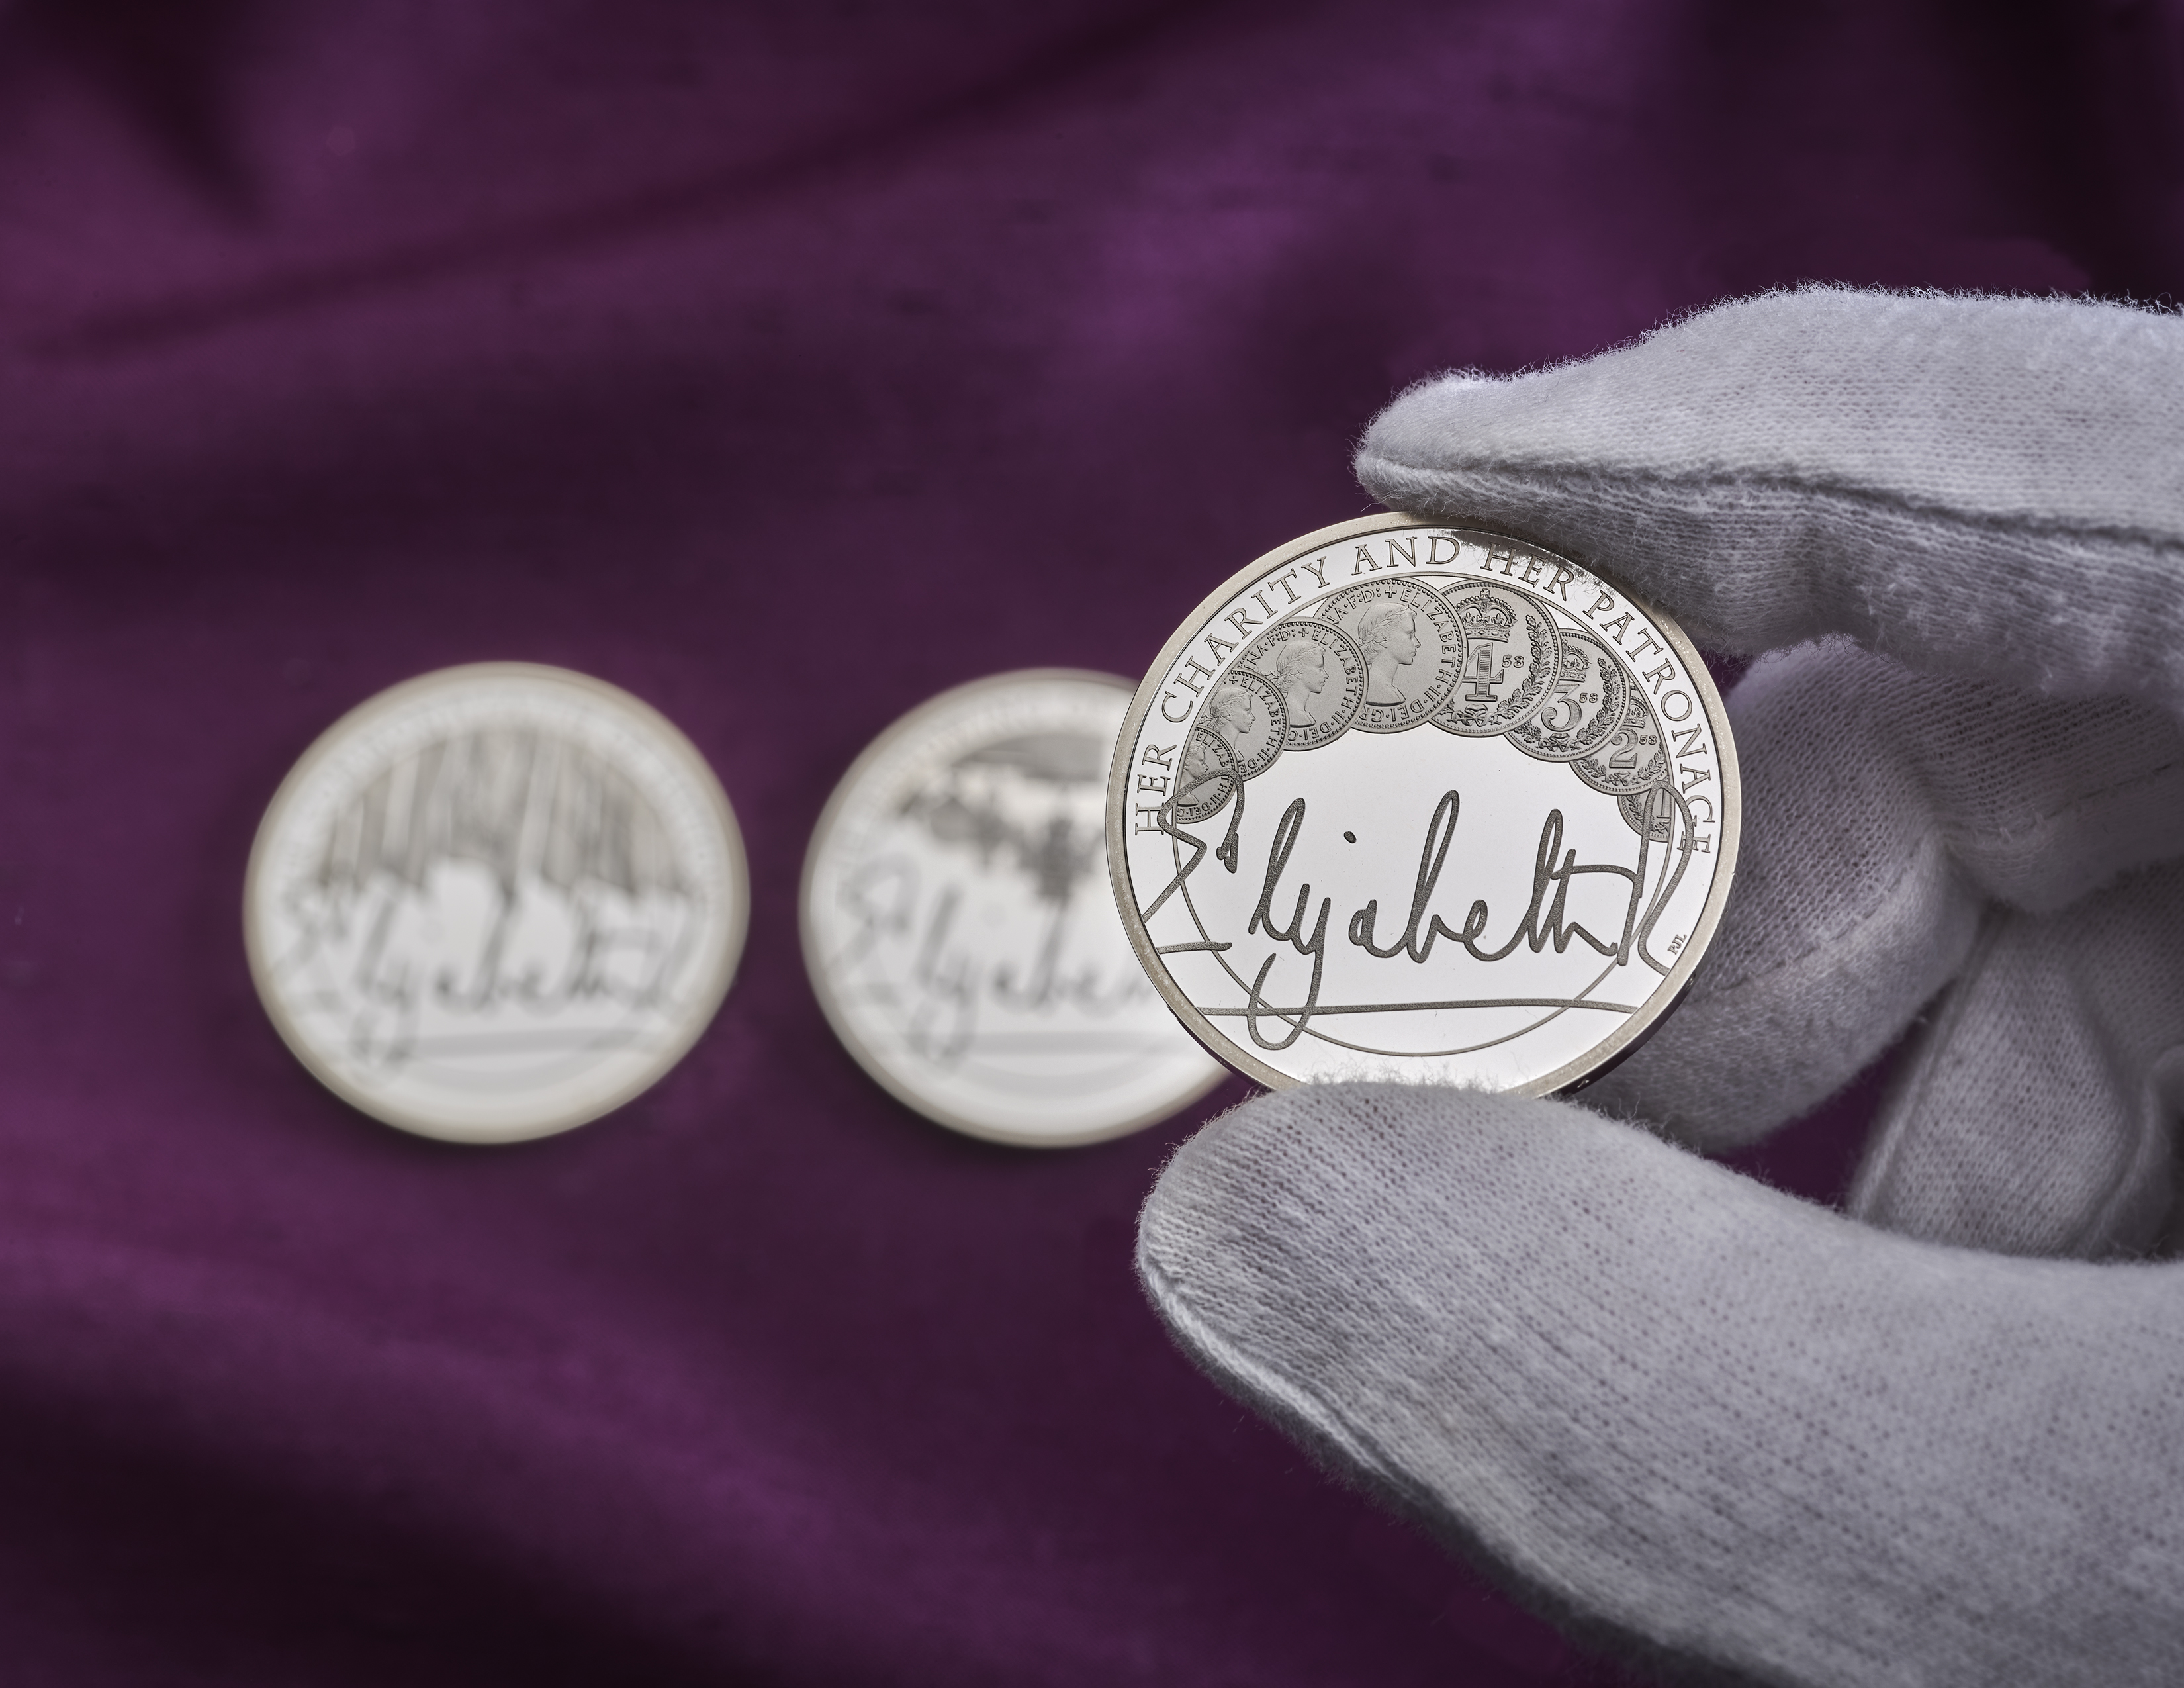 A Royal Mint coin being held